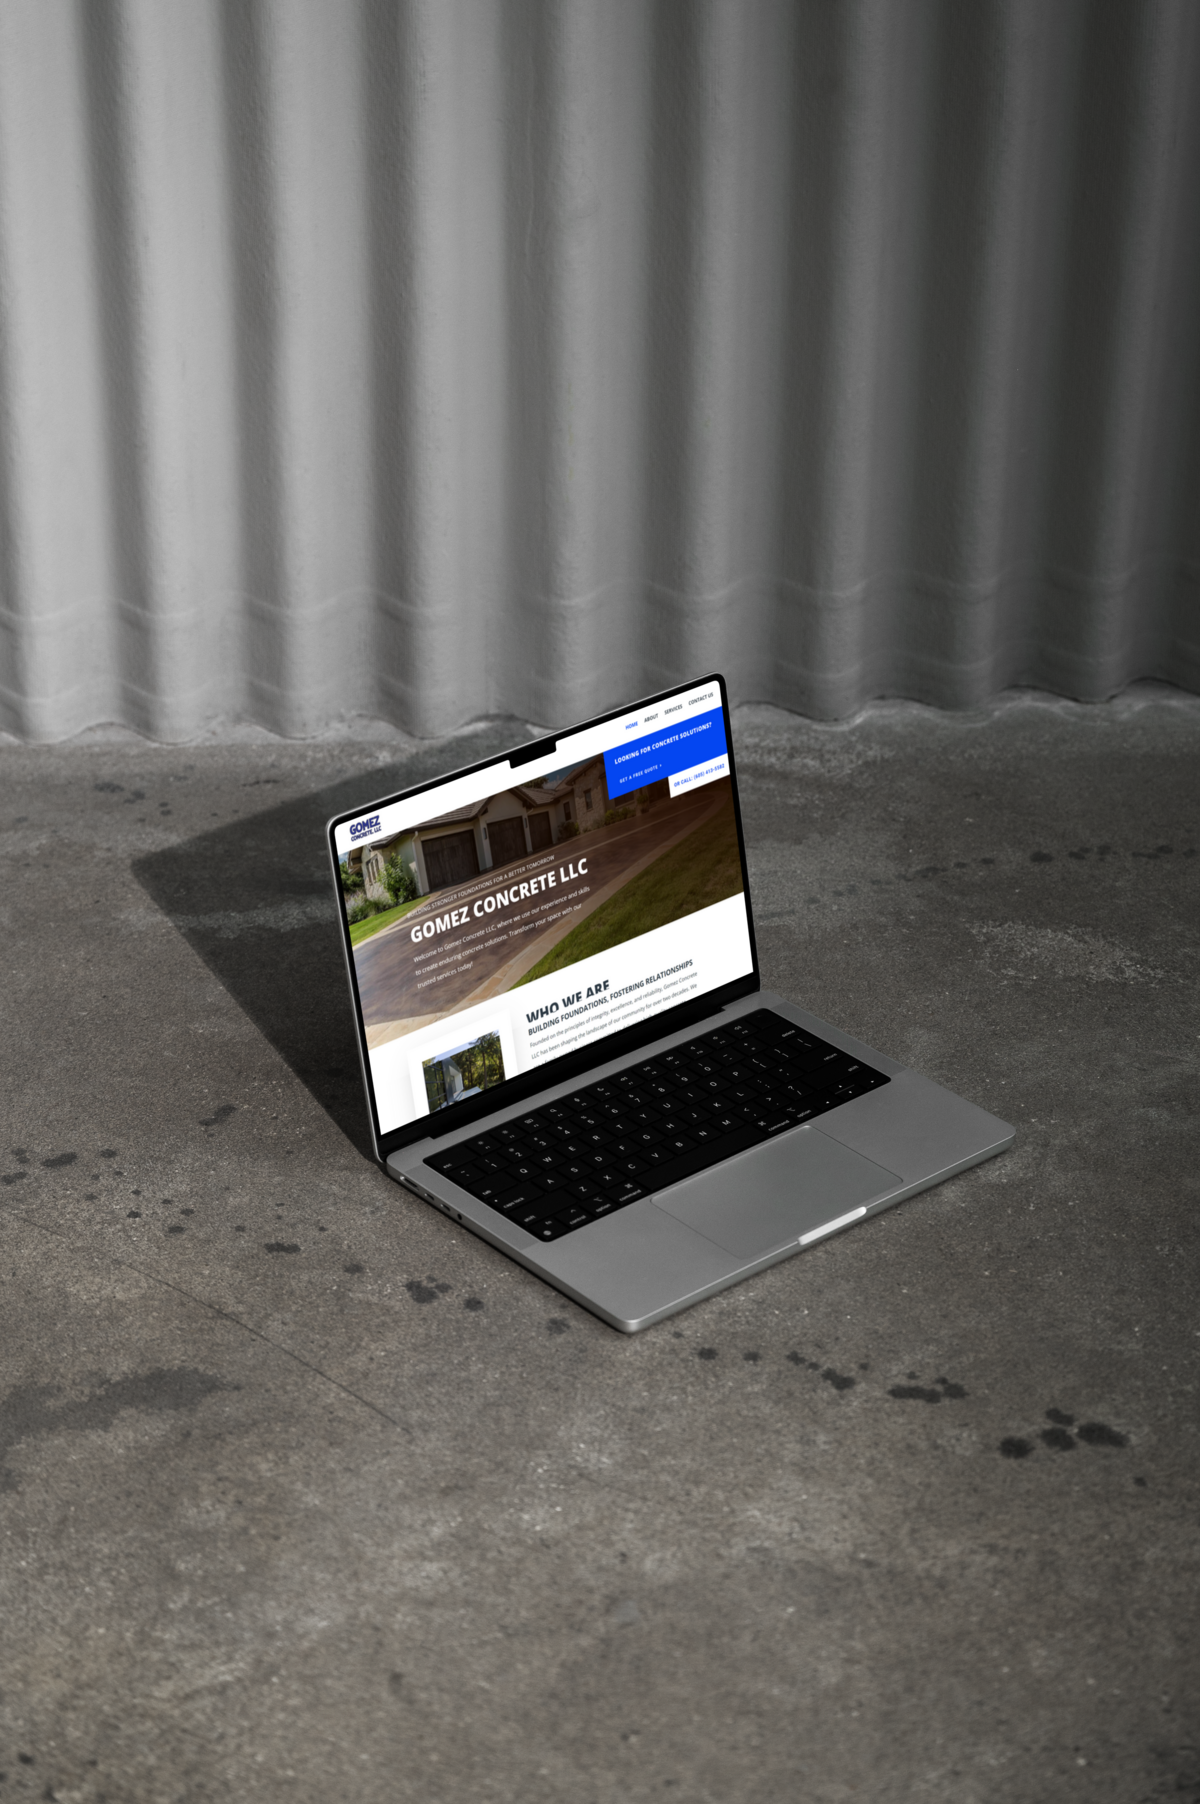 Lead the construction sector with a website designed by The Agency. Our Gomez Concrete project is a testament to our ability to craft digital experiences that highlight your expertise and attract clients.